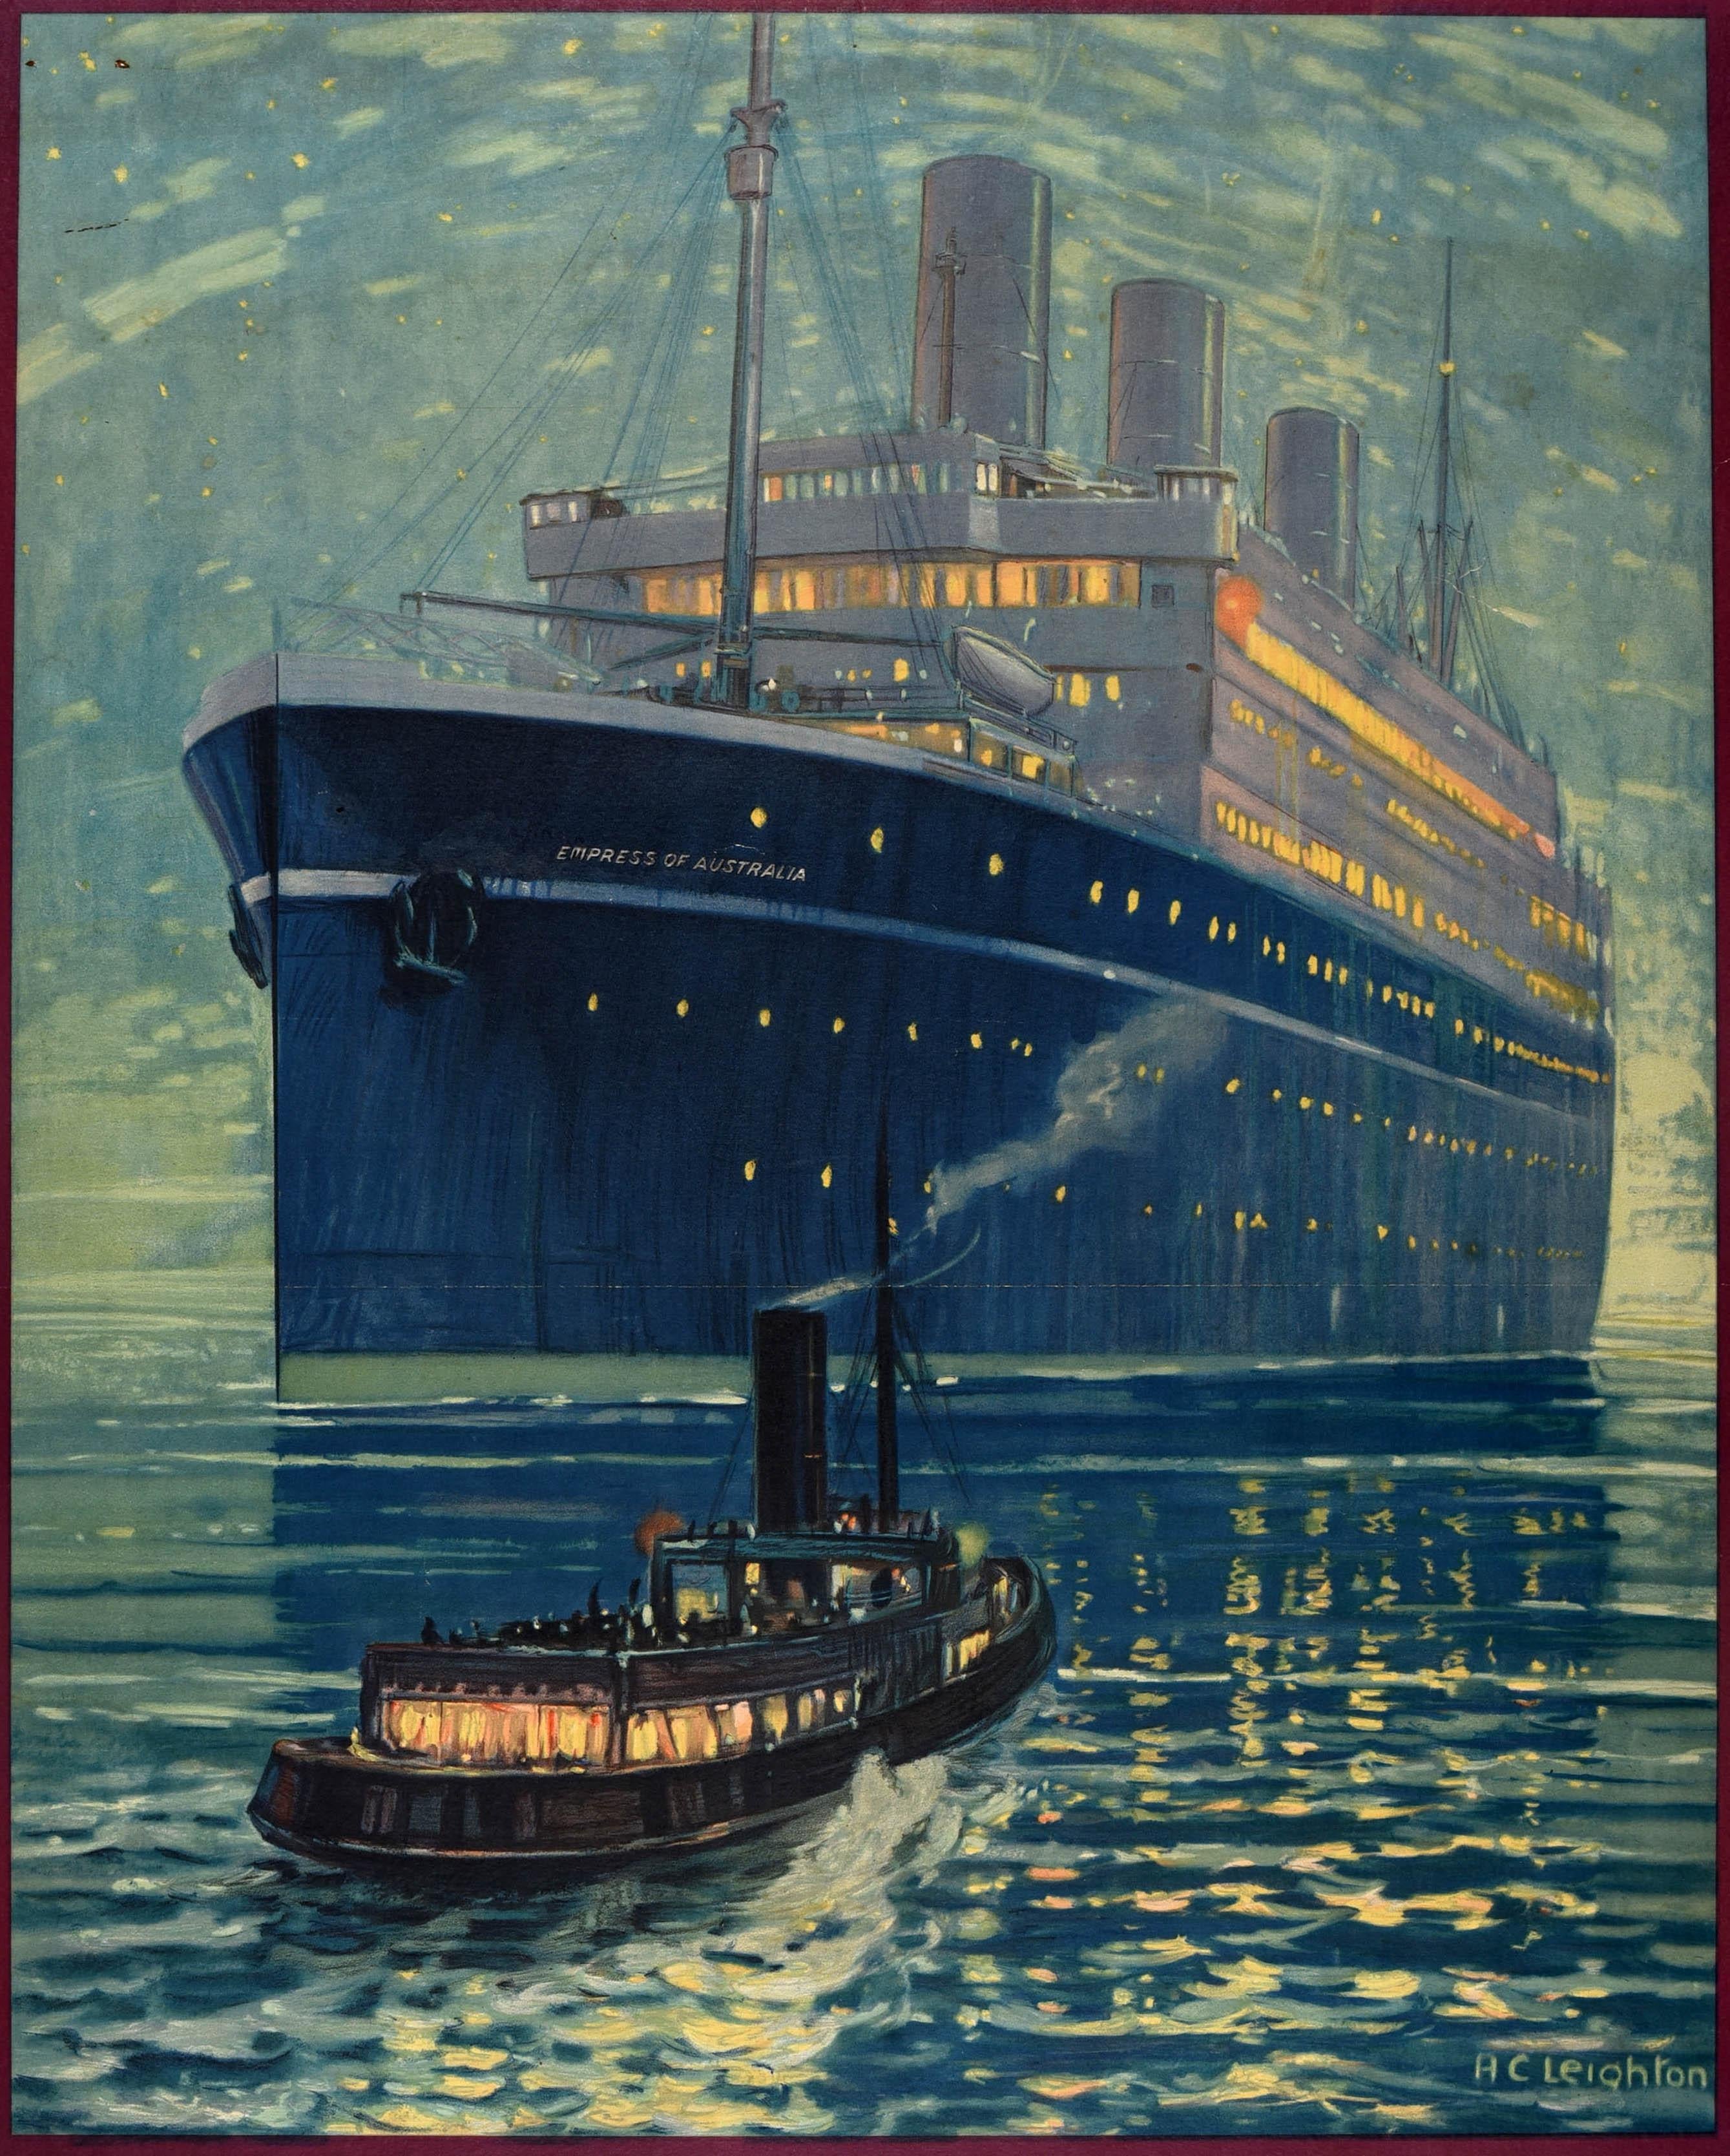 Original vintage cruise ship travel poster - Canadian Pacific Empress of Australia Europe Canada USA - featuring a night time seascape by Alfred Crocker Leighton (1901-1956) depicting a small steam boat approaching the Empress of Australia ocean